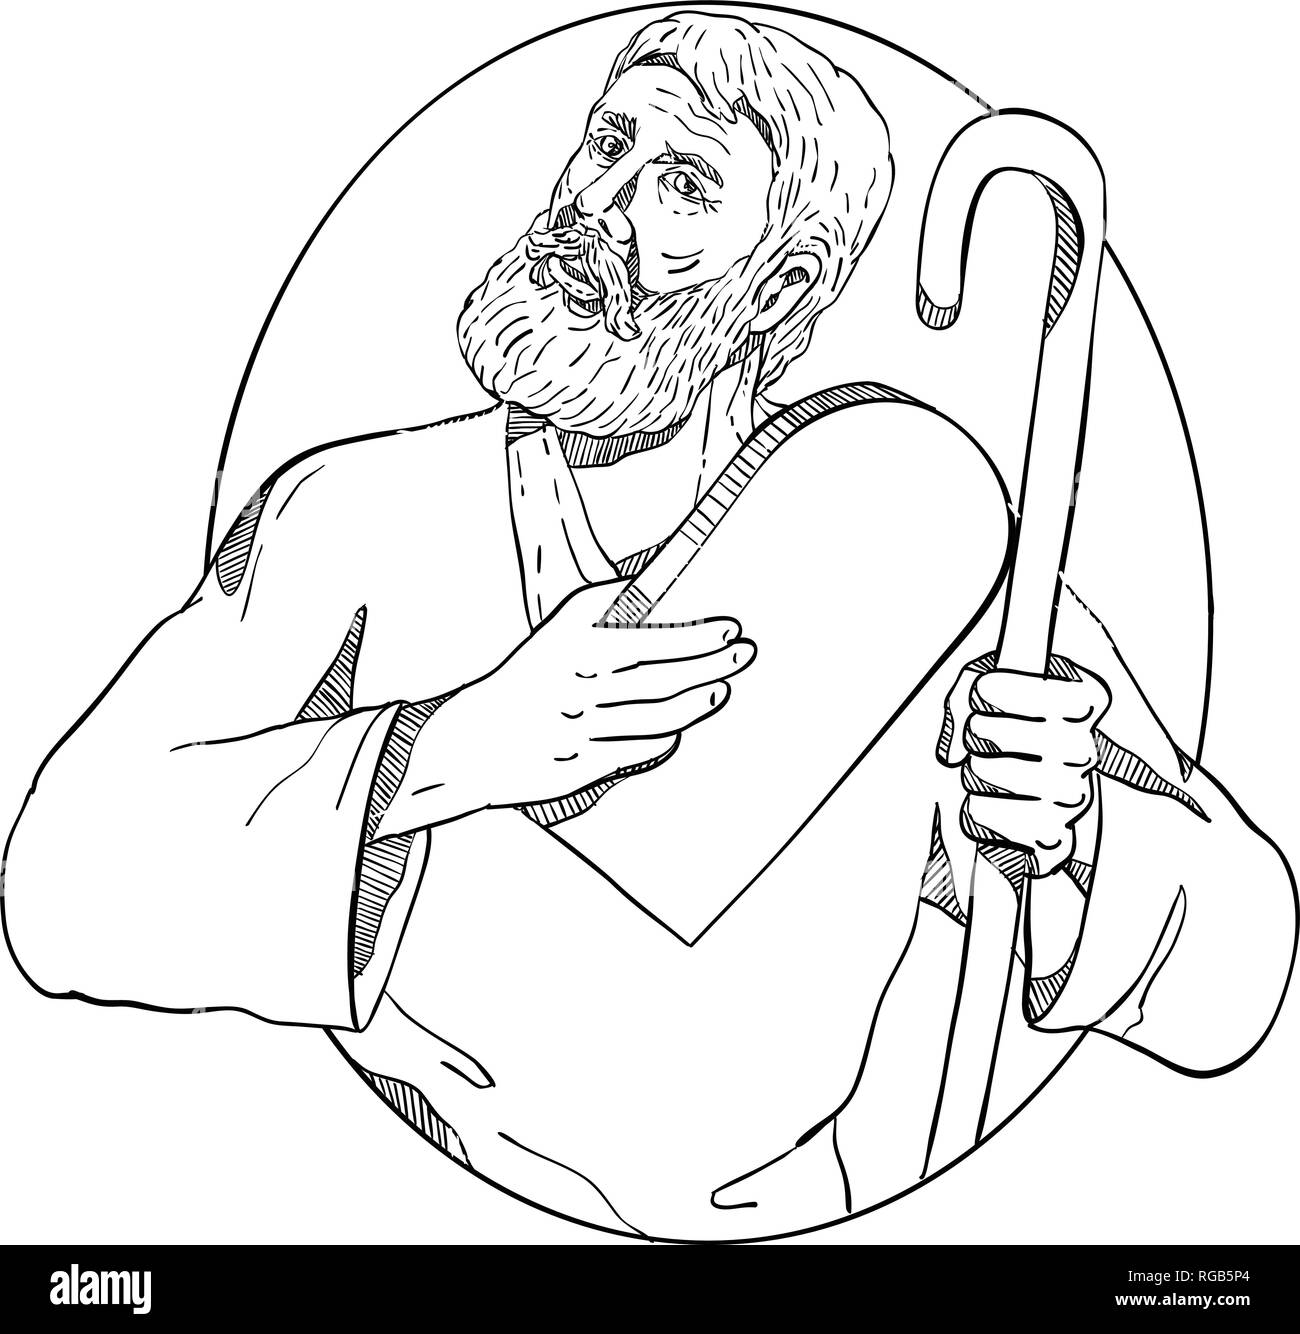 Drawing sketch style illustration of Moses, a prophet in the Abrahamic religions holding the Ten Commandments tablet and his staff set inside oval on  Stock Vector